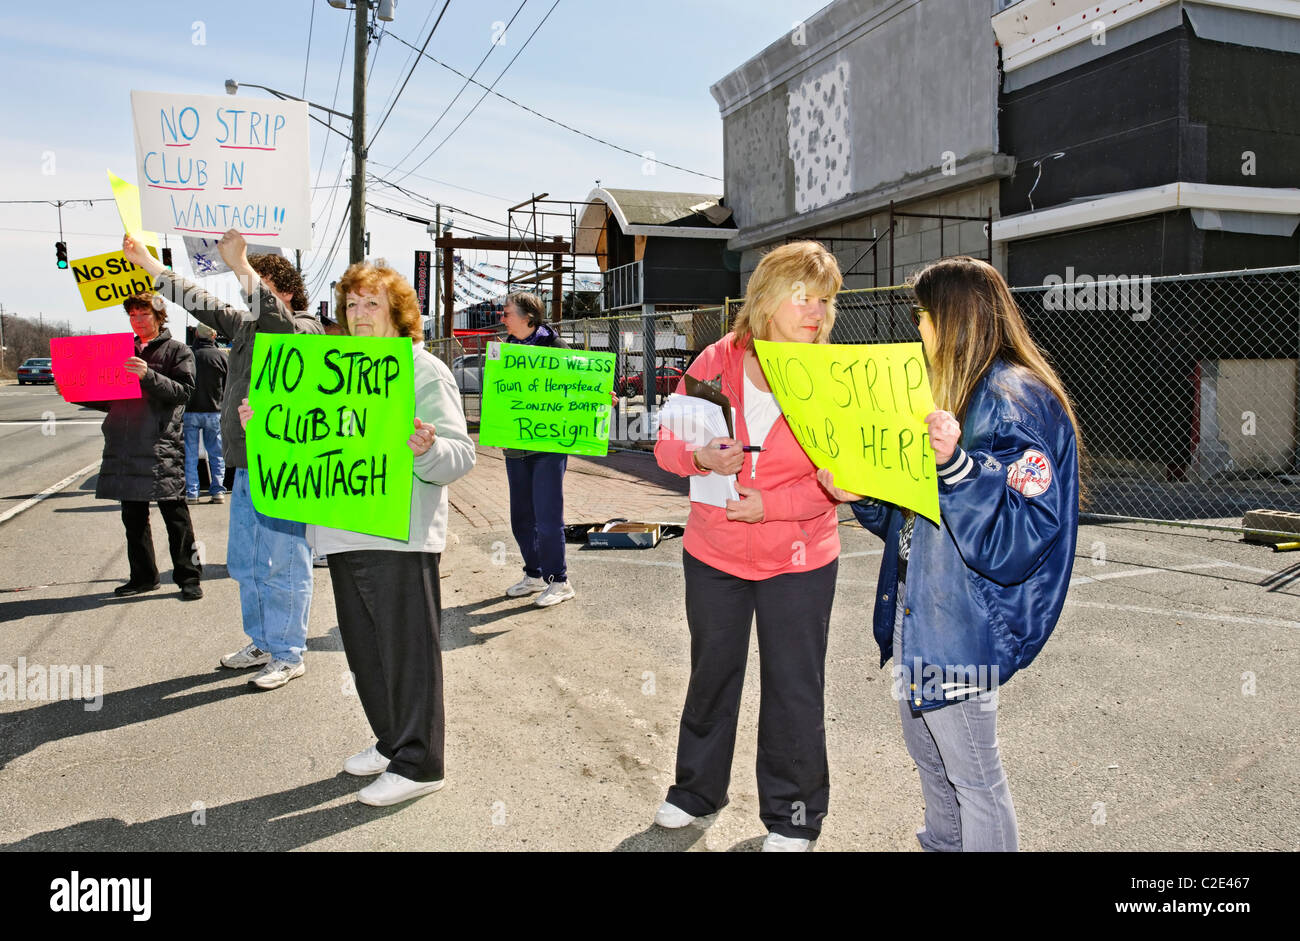 APR 9, 2011 - WANTAGH, NY: Protesters with signs against strip club allegedly being built there, Sunrise Highway, Long Island NY Stock Photo